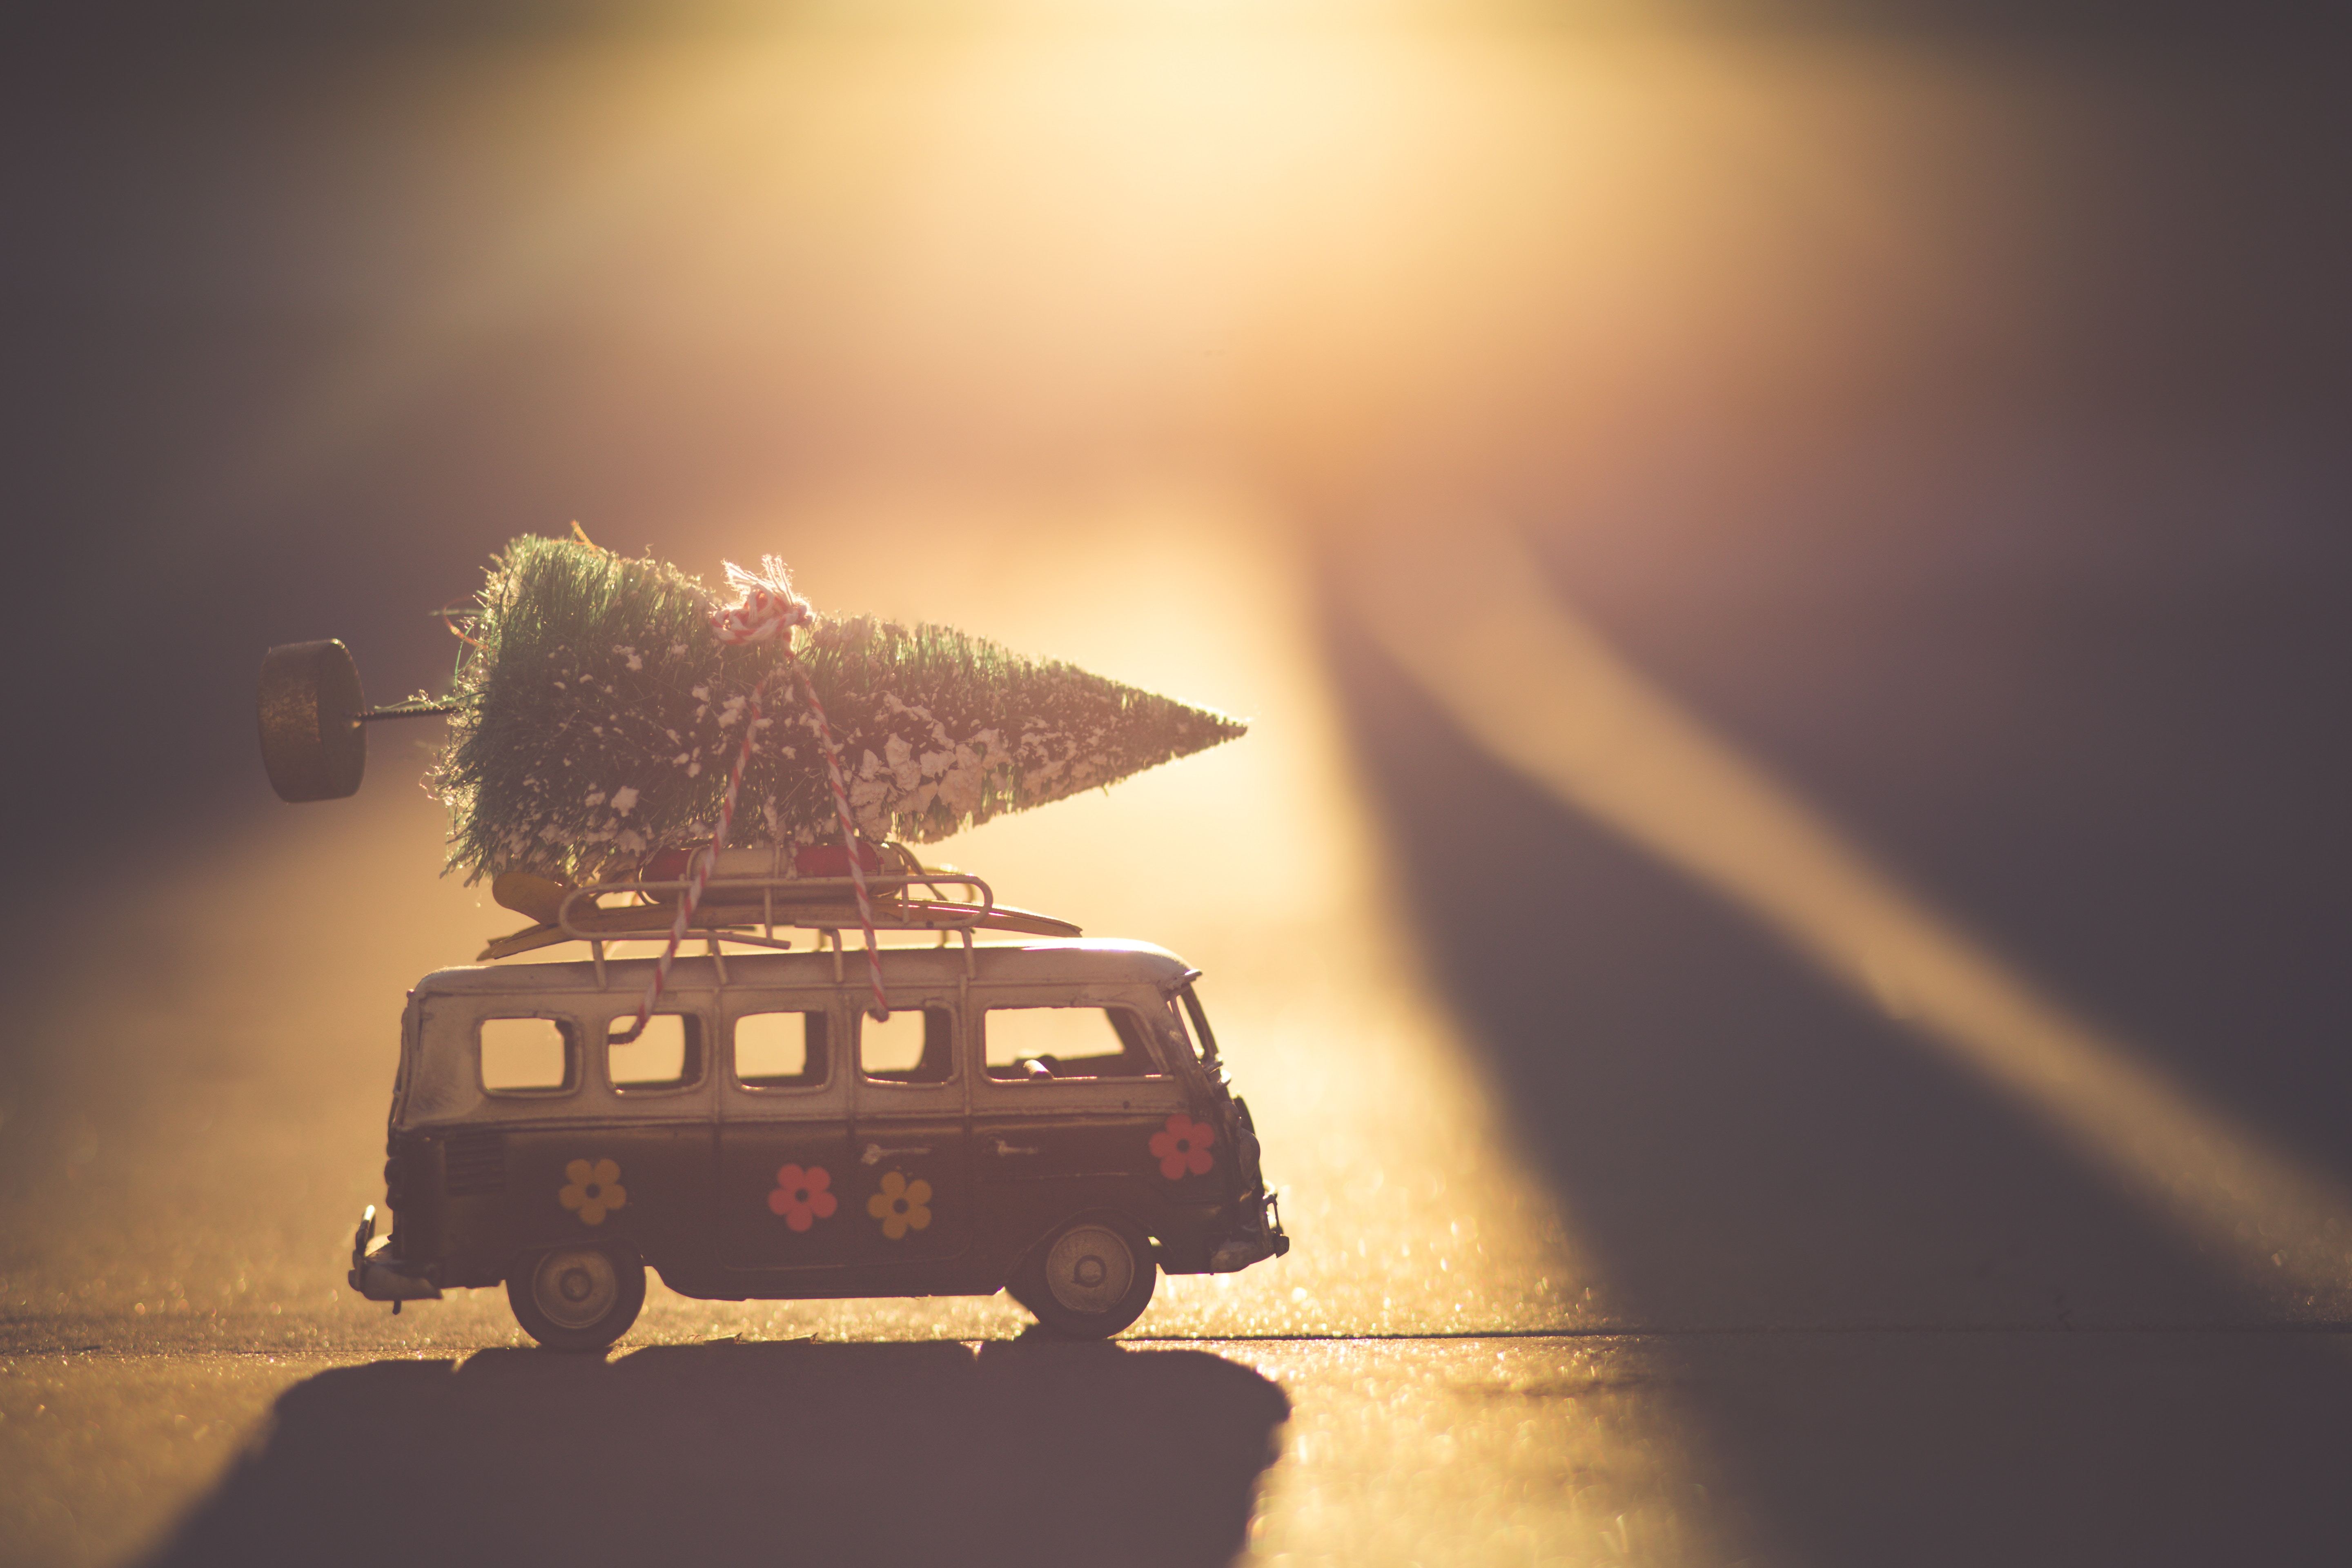 Toy Bus Carrying Miniature Christmas Tree